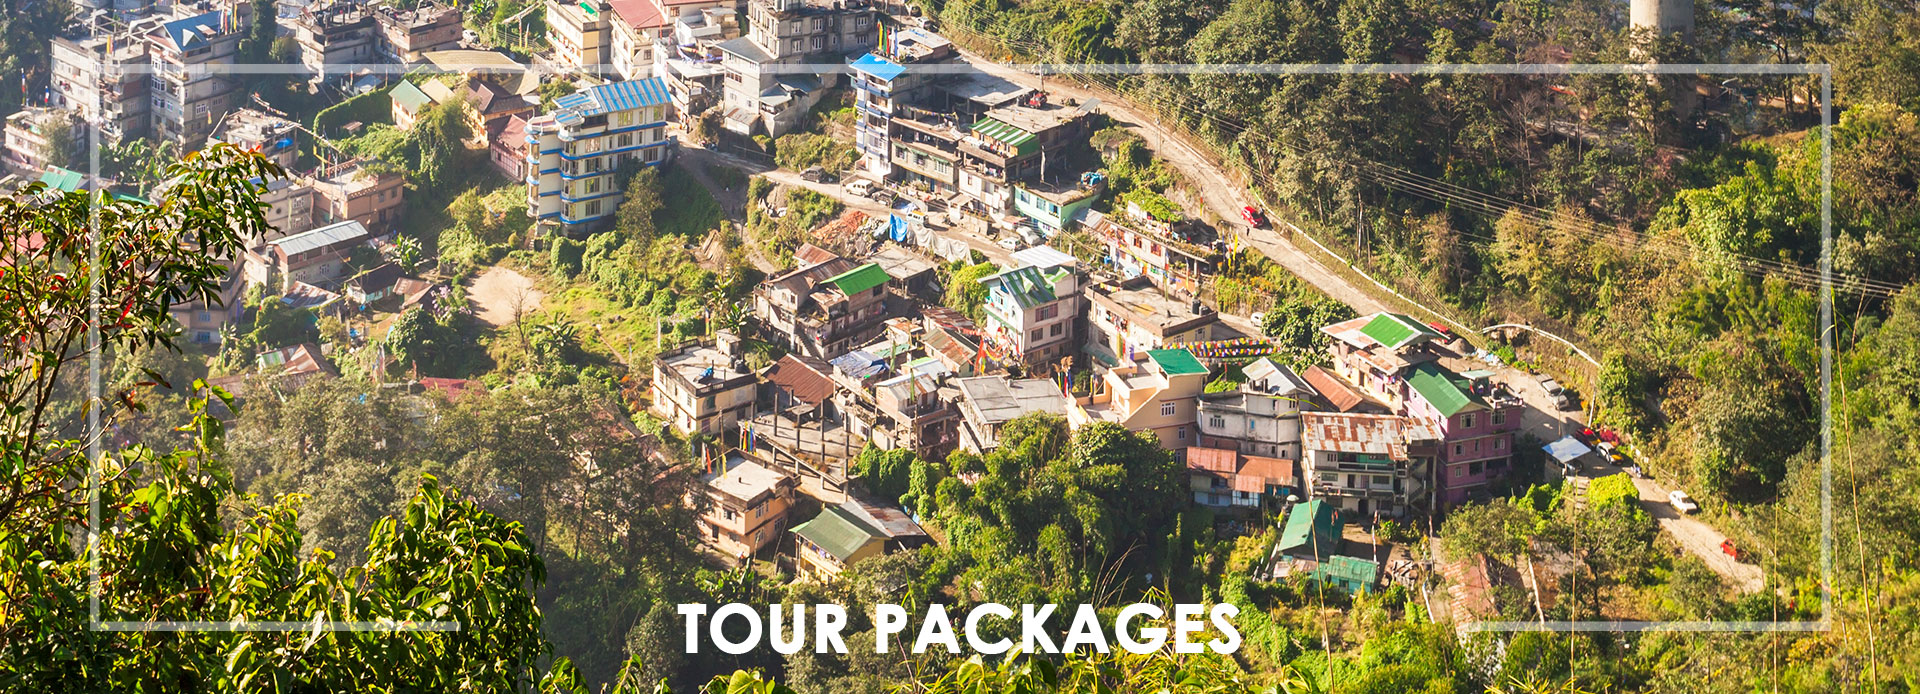  Tour Package